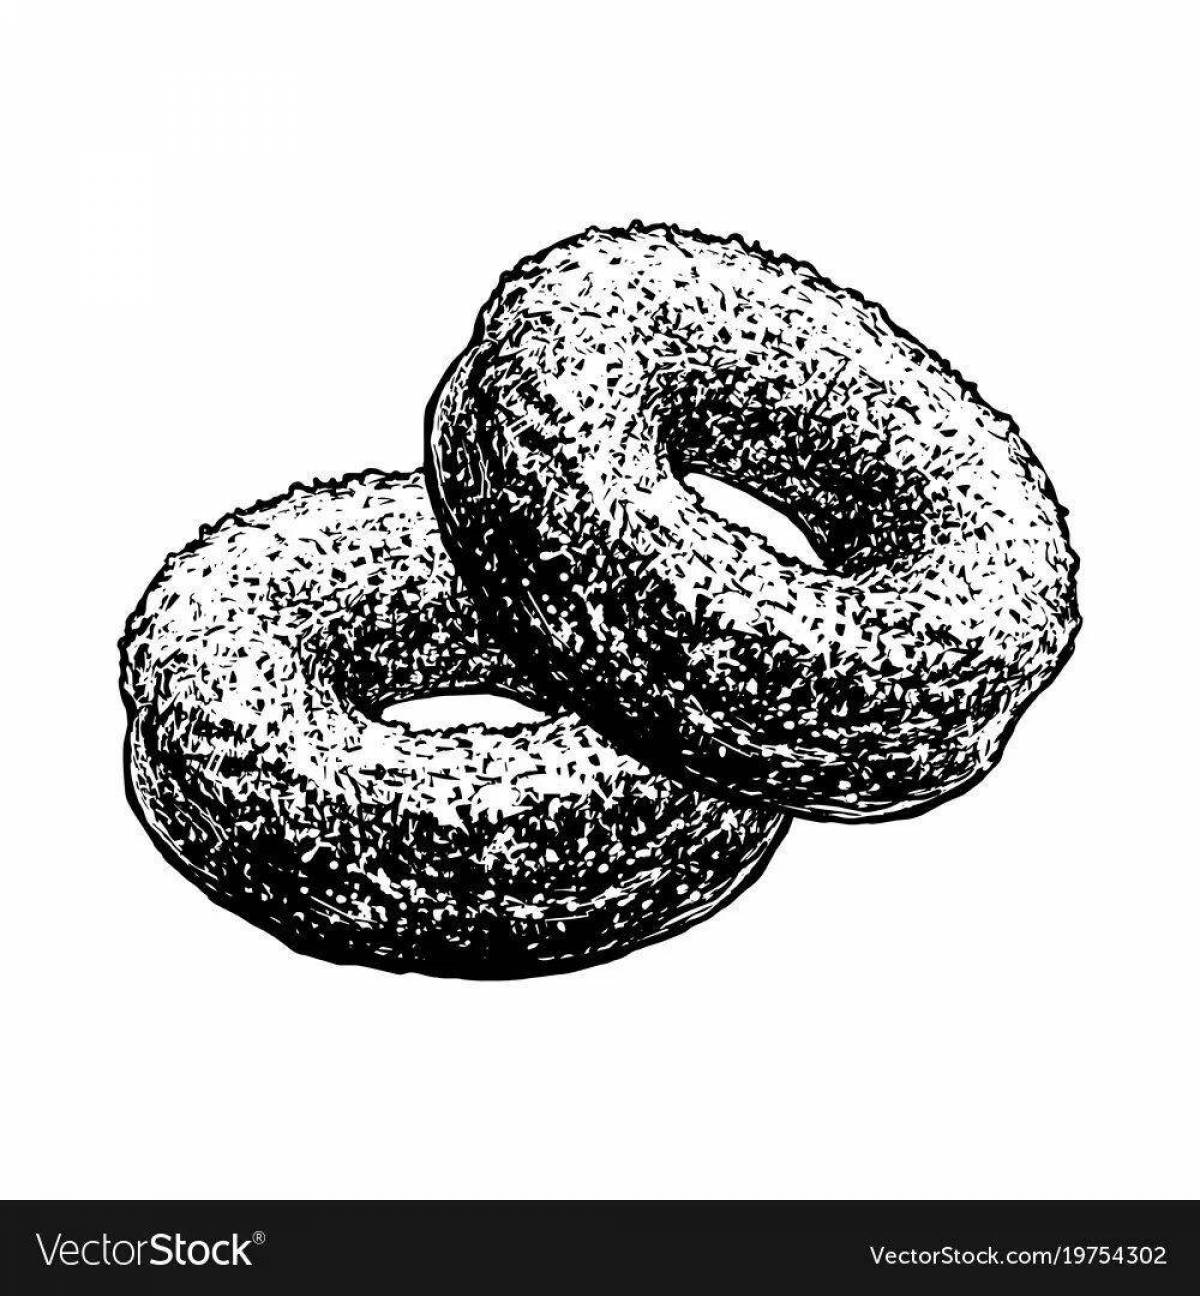 Delicious donut bagel coloring page